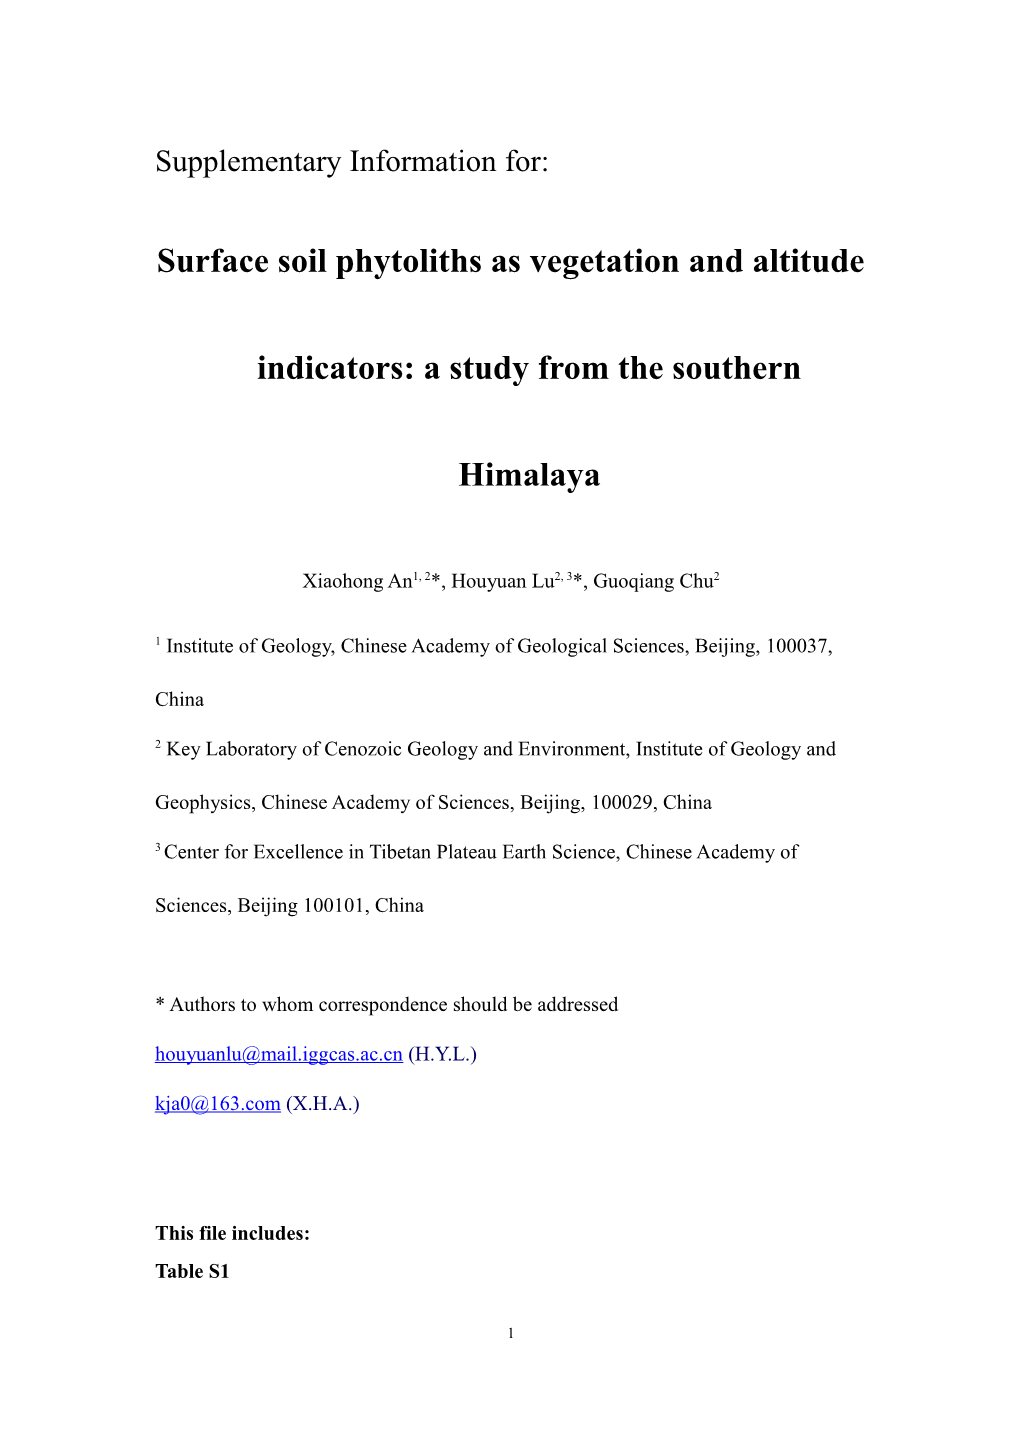 Surface Soil Phytoliths As Vegetation and Altitude Indicators: a Study from the Southern